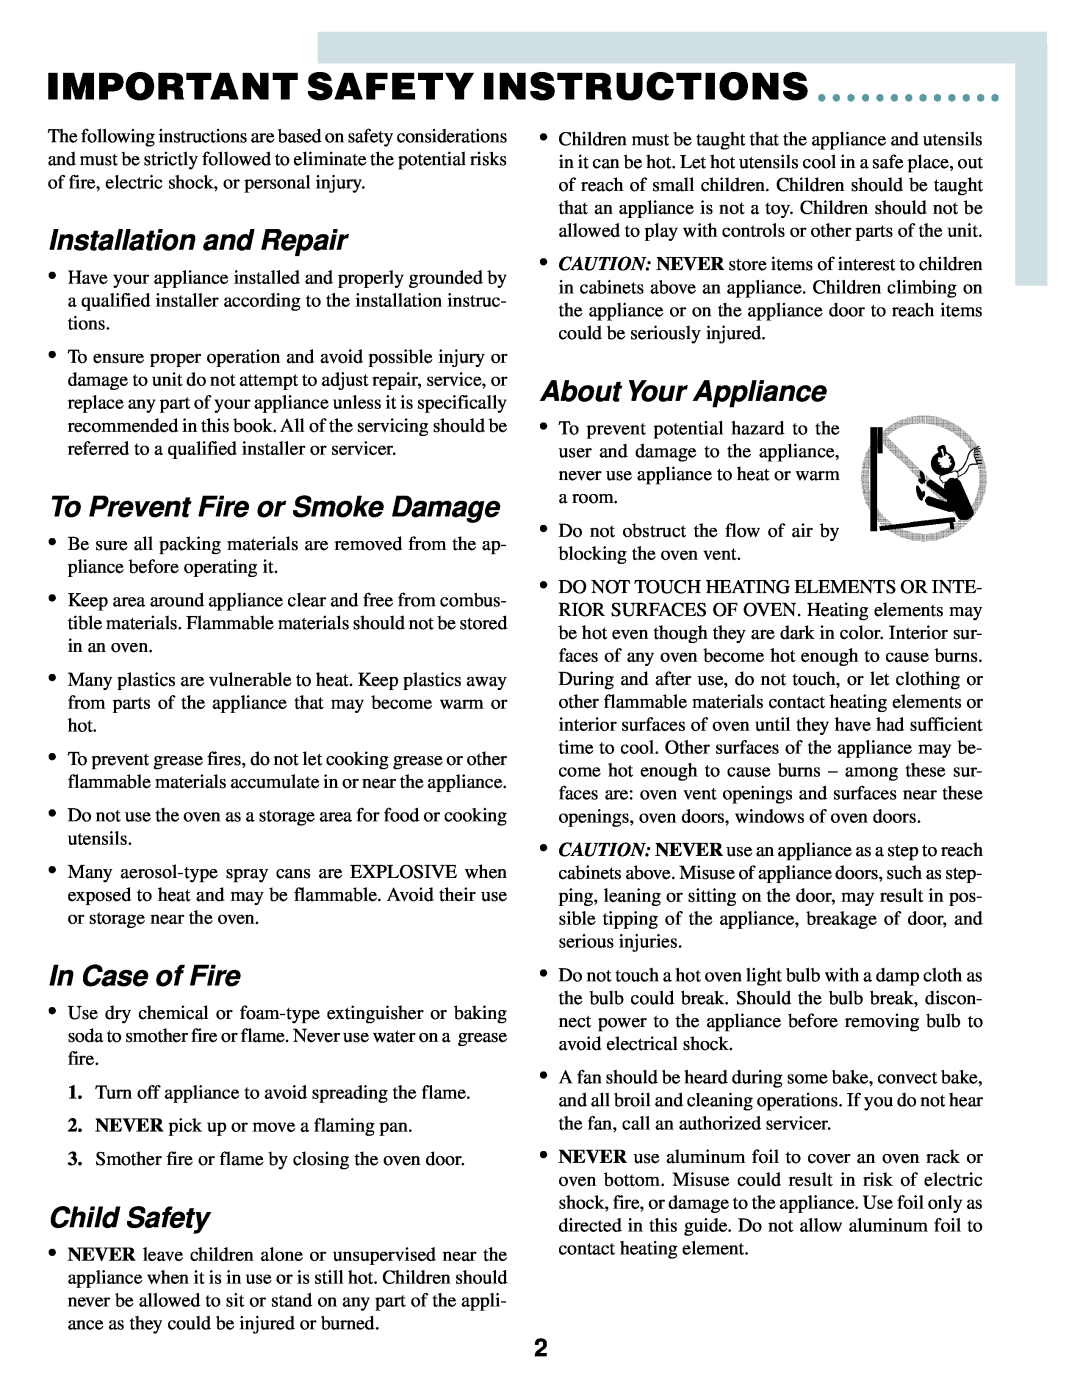 Maytag MEW6530B Important Safety Instructions, Installation and Repair, To Prevent Fire or Smoke Damage, In Case of Fire 